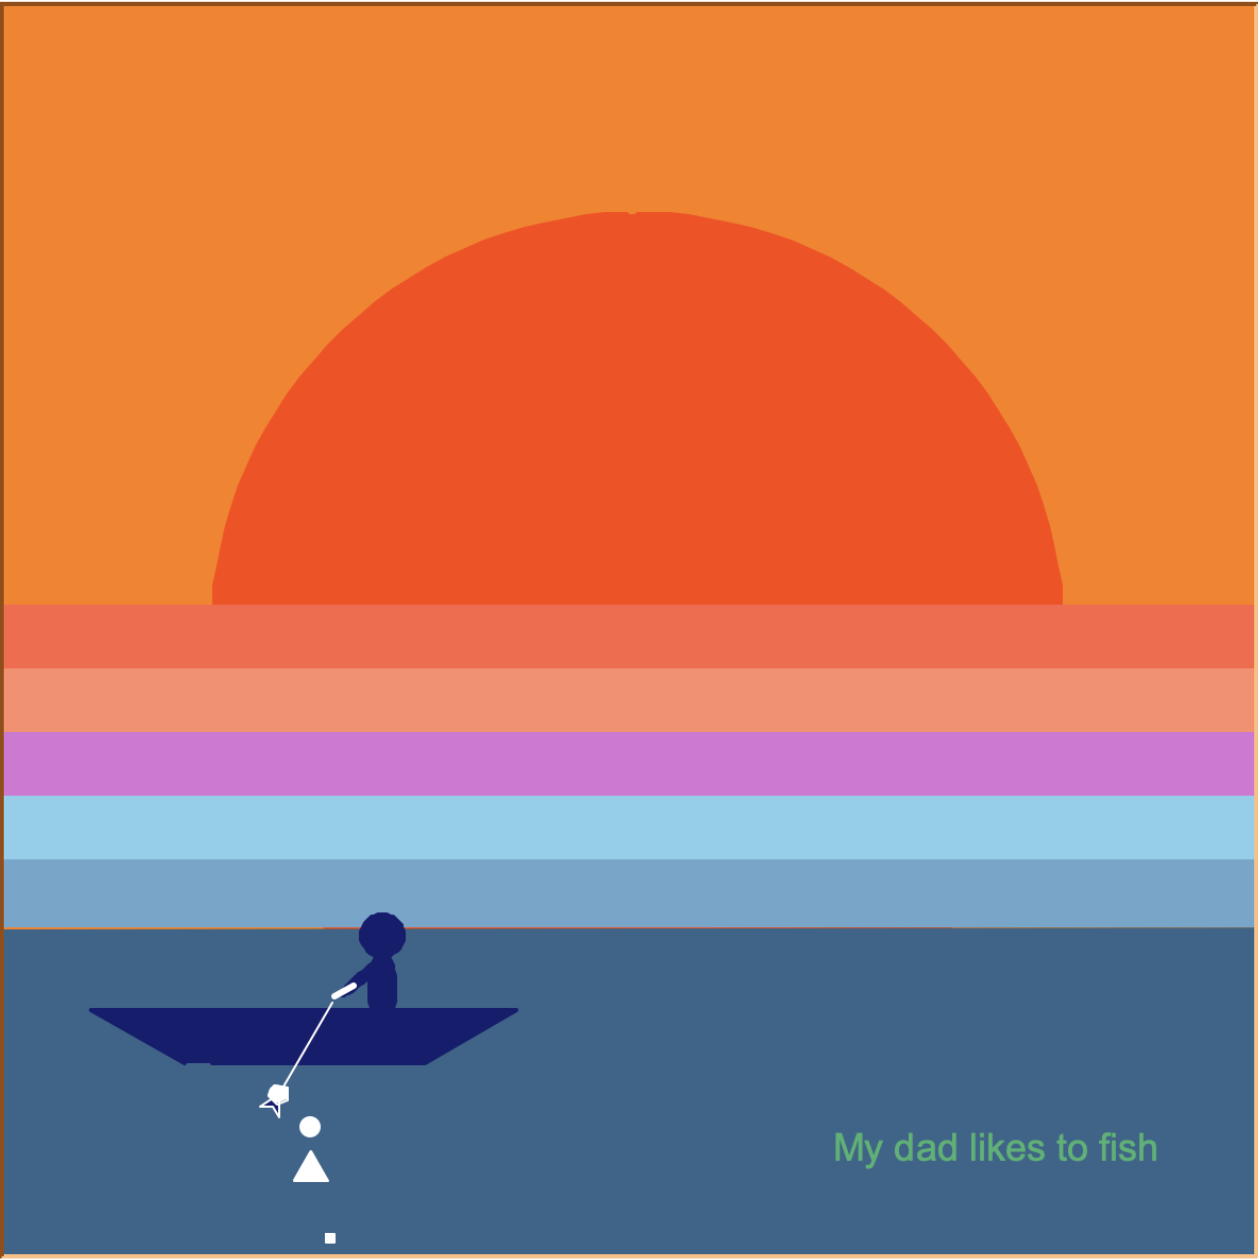 An image of a sunset with a large orange semicircle in the background with a small navy blue silhouette or a person in a boat with a fishing rod in hand. The text in the lower right hand corner says My dad likes to fish, created by Brigitte Lee.